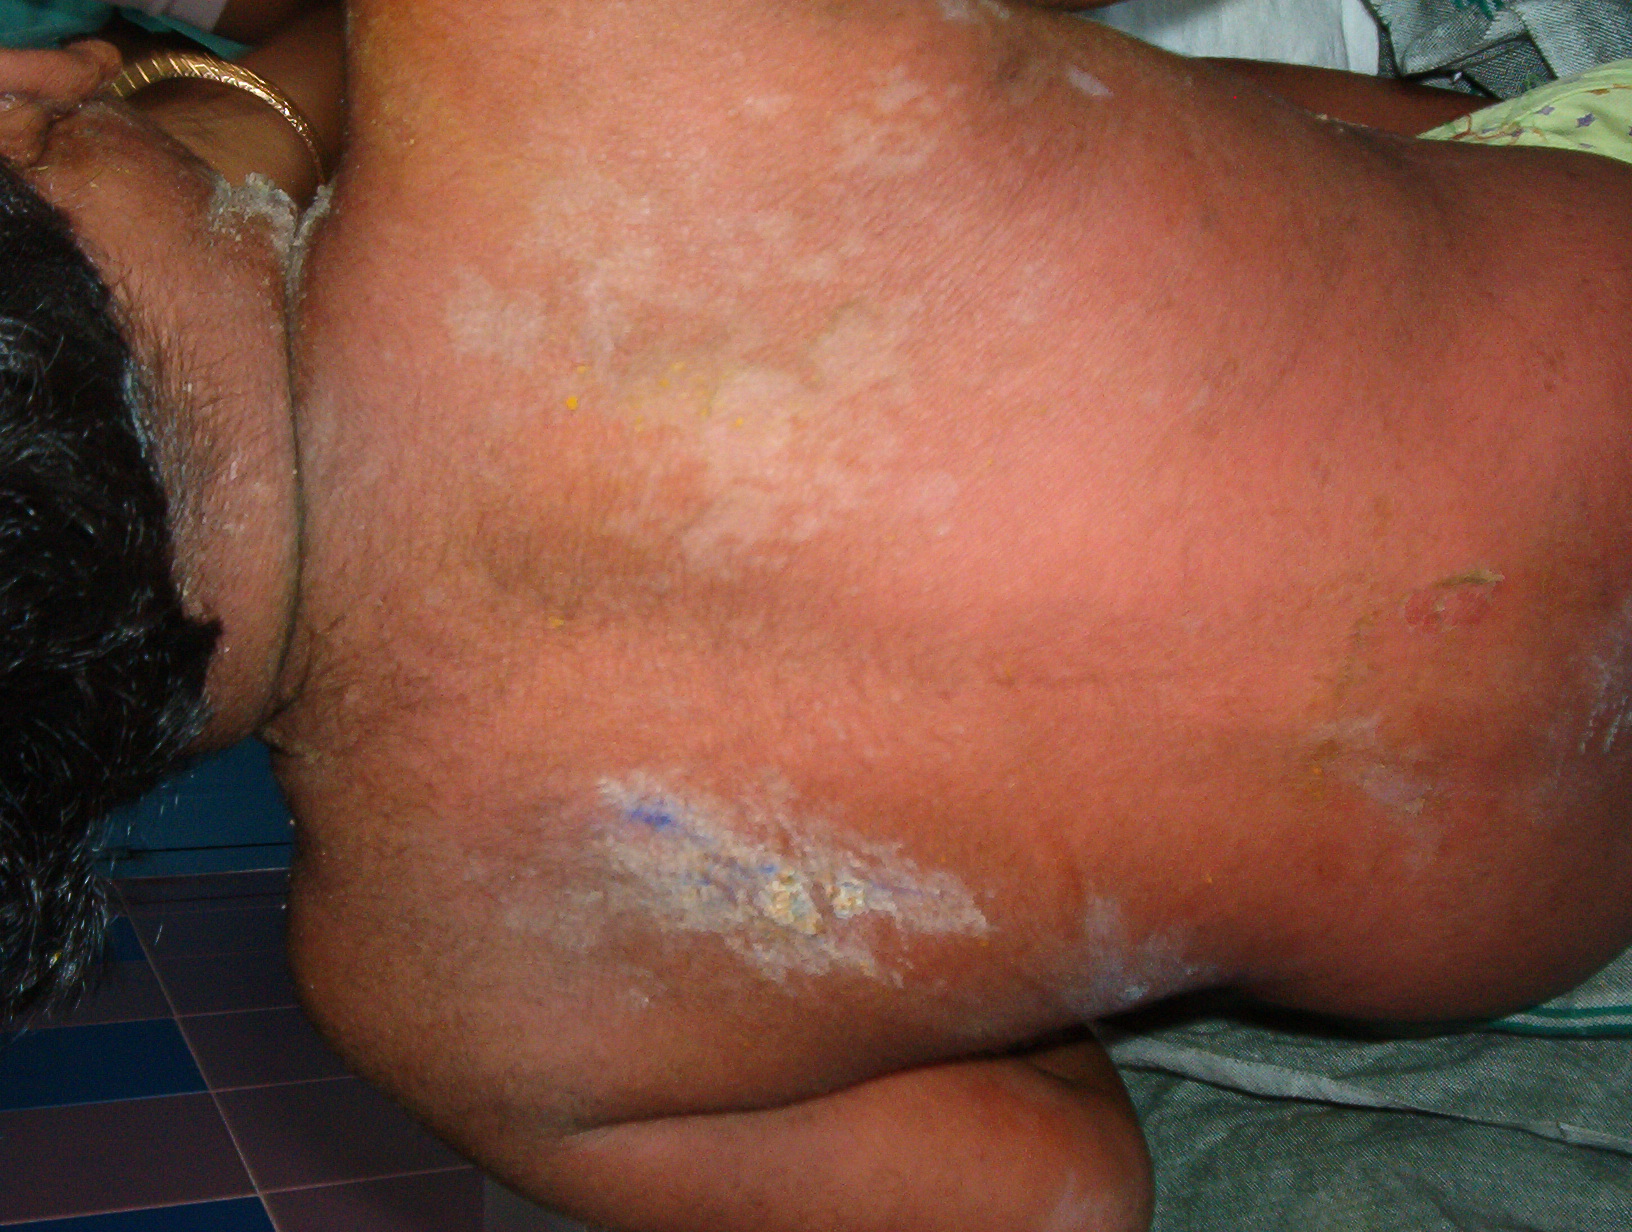 Staphylococcal scalded skin syndrome | DermNet New Zealand